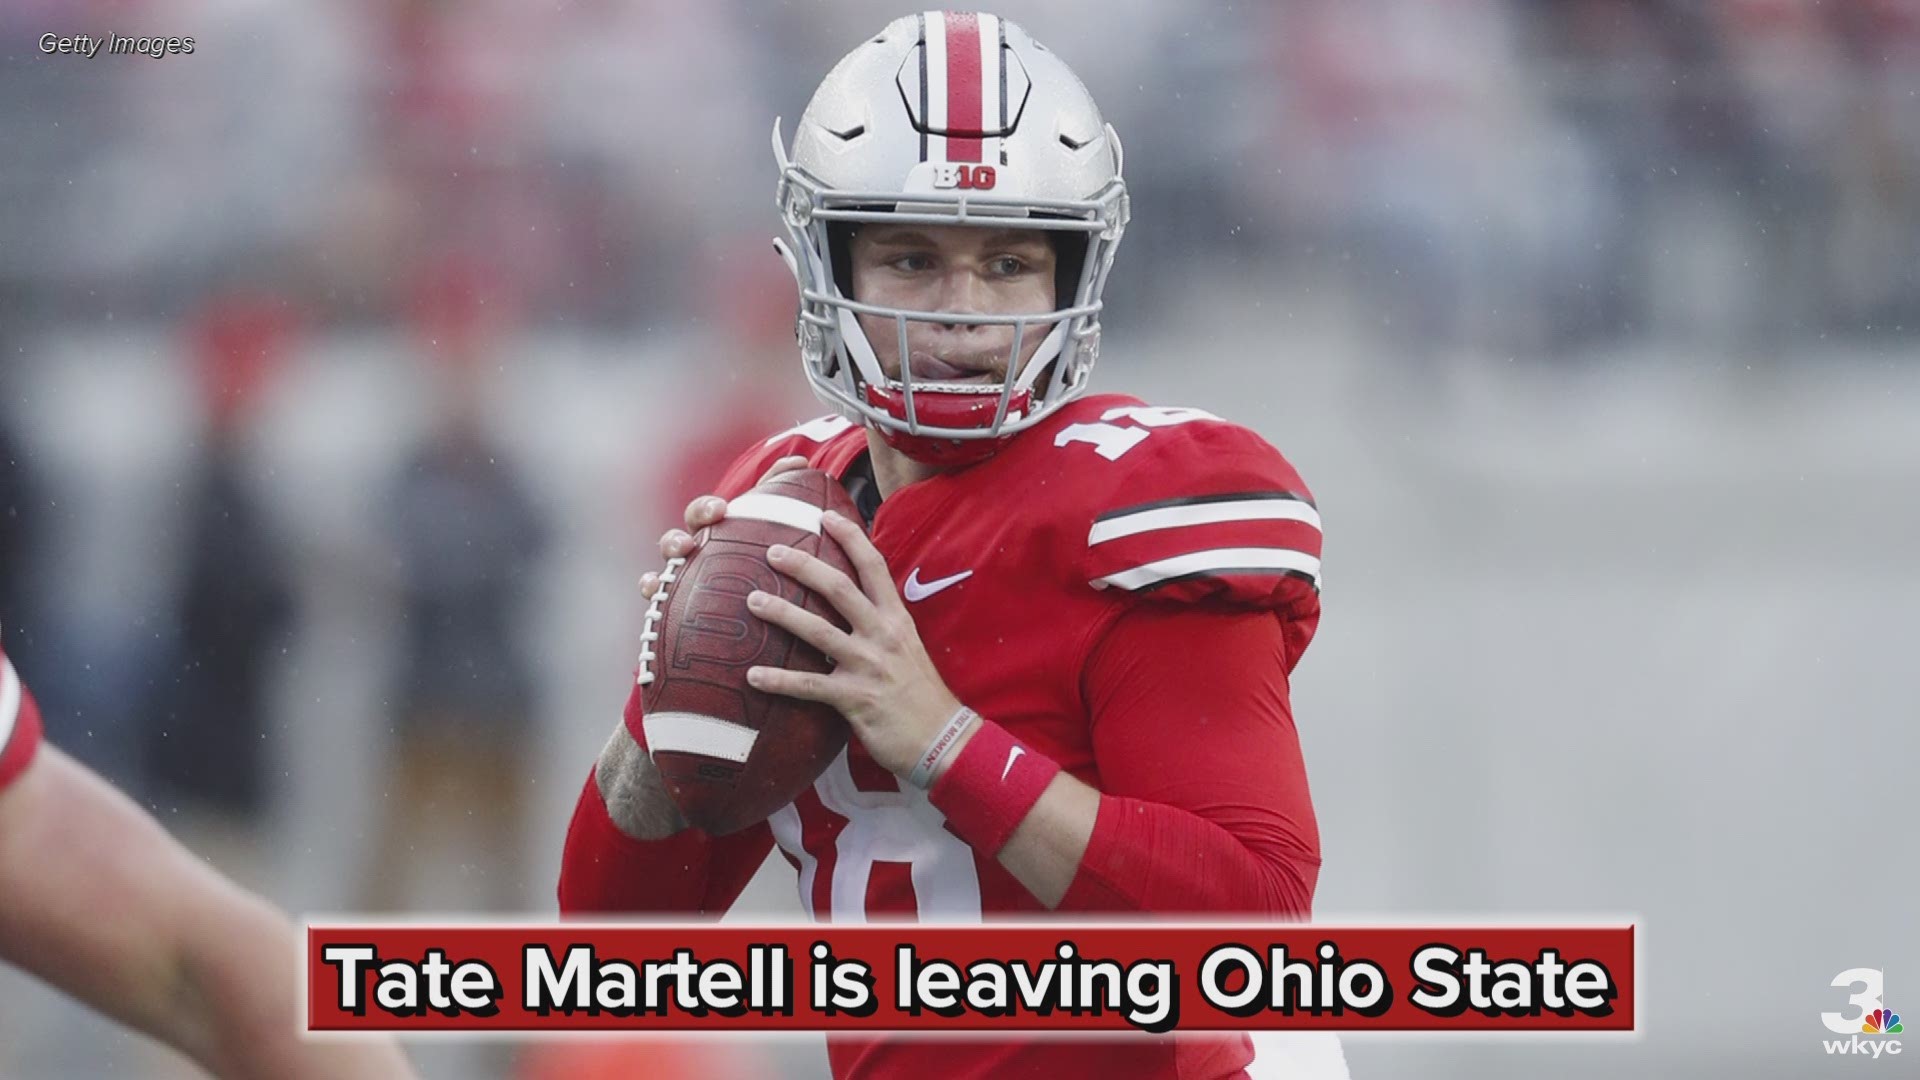 Martell's transfer comes less than two weeks after quarterback Justin Fields transferred to Ohio State from Georgia.